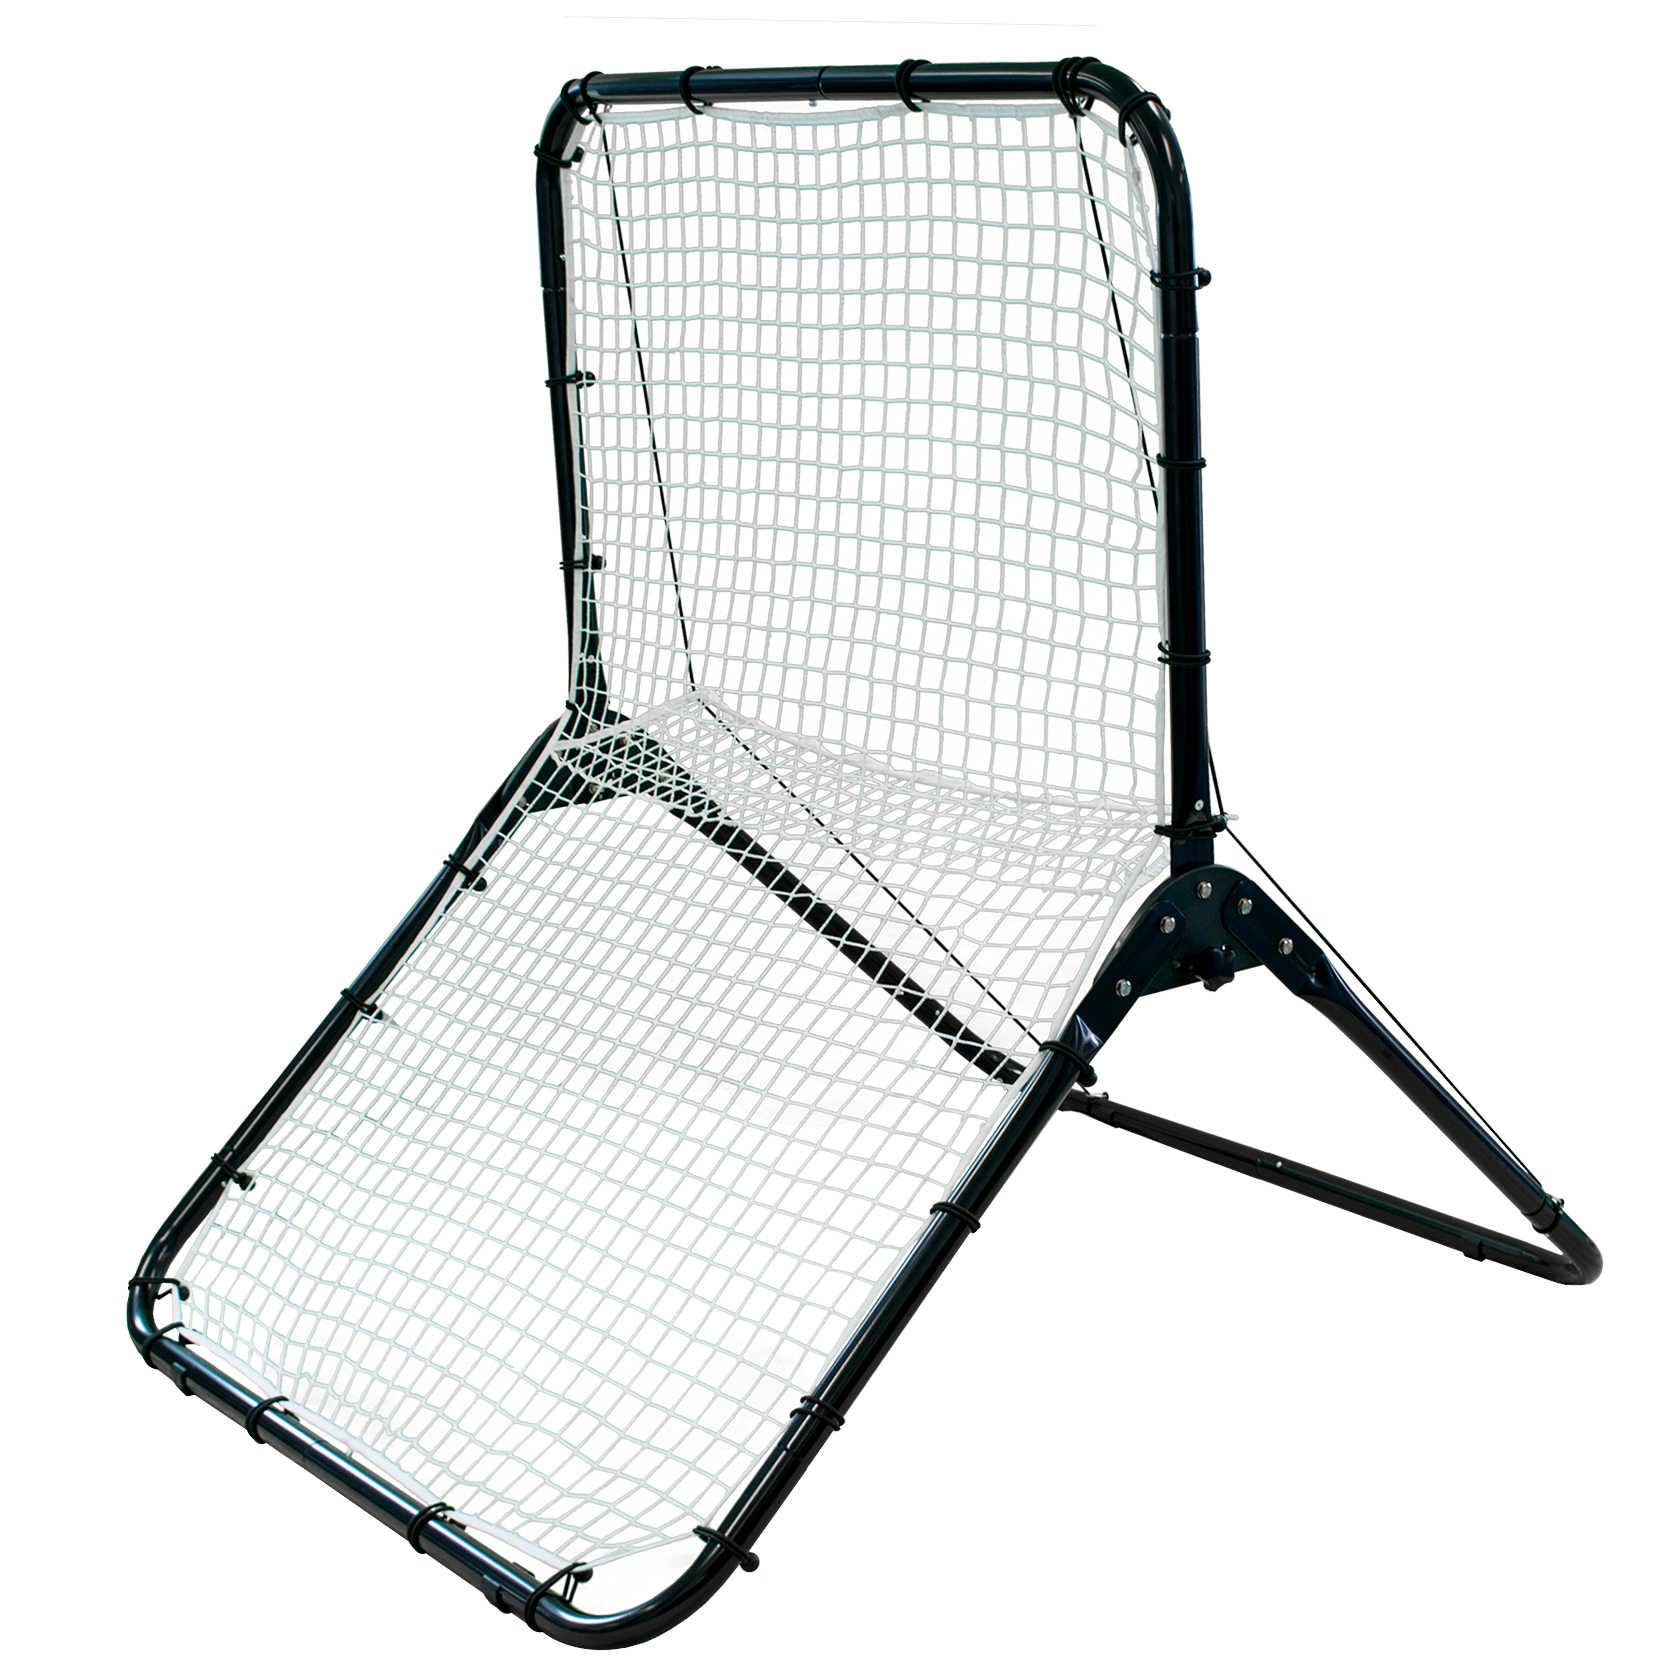 Tourna Rally Pro Rebounder Unique Sports Products Inc REB-7